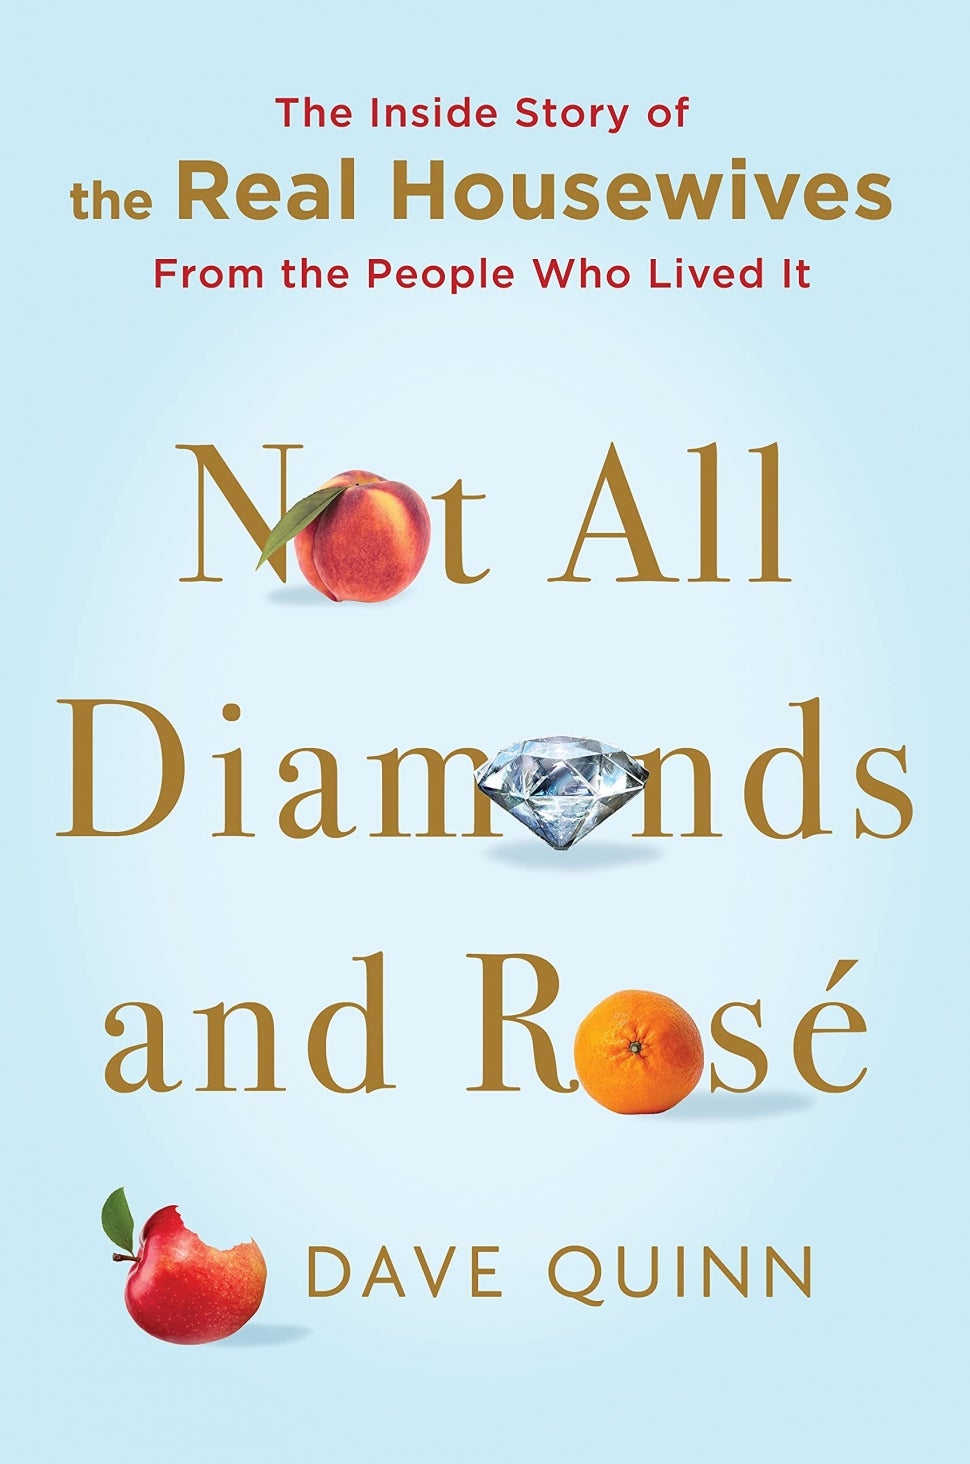 The cover of Not All Diamonds and Rose by Dave Quinn